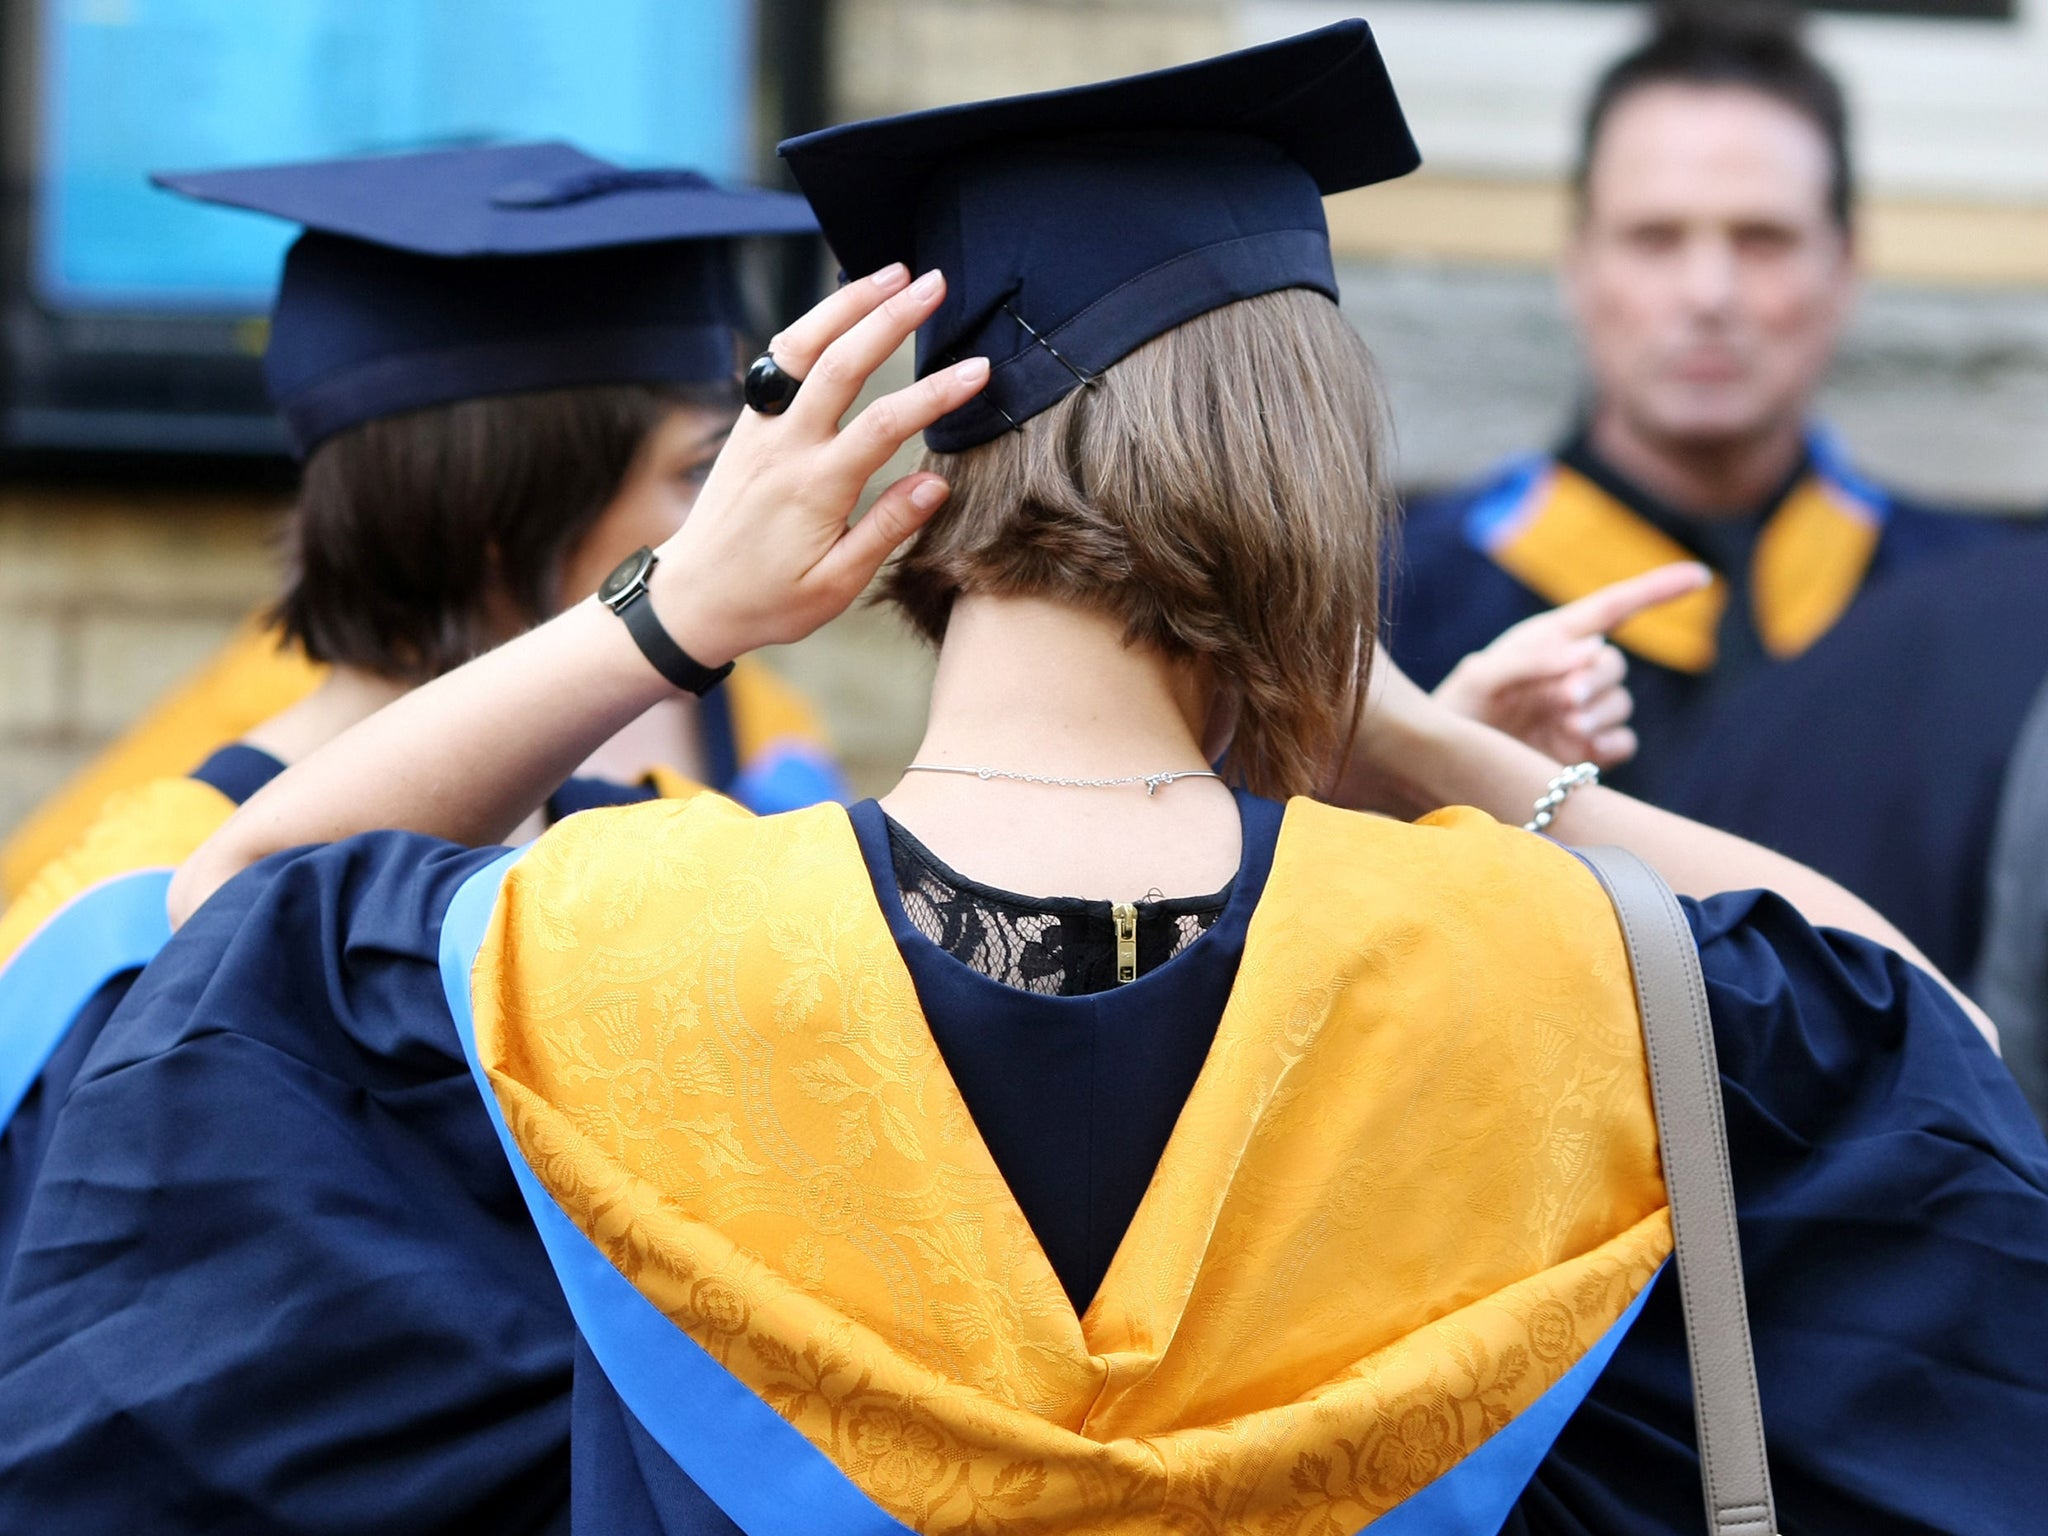 High interest rates on student loans should be cut from 6 per cent to 1.5 per cent, a report said